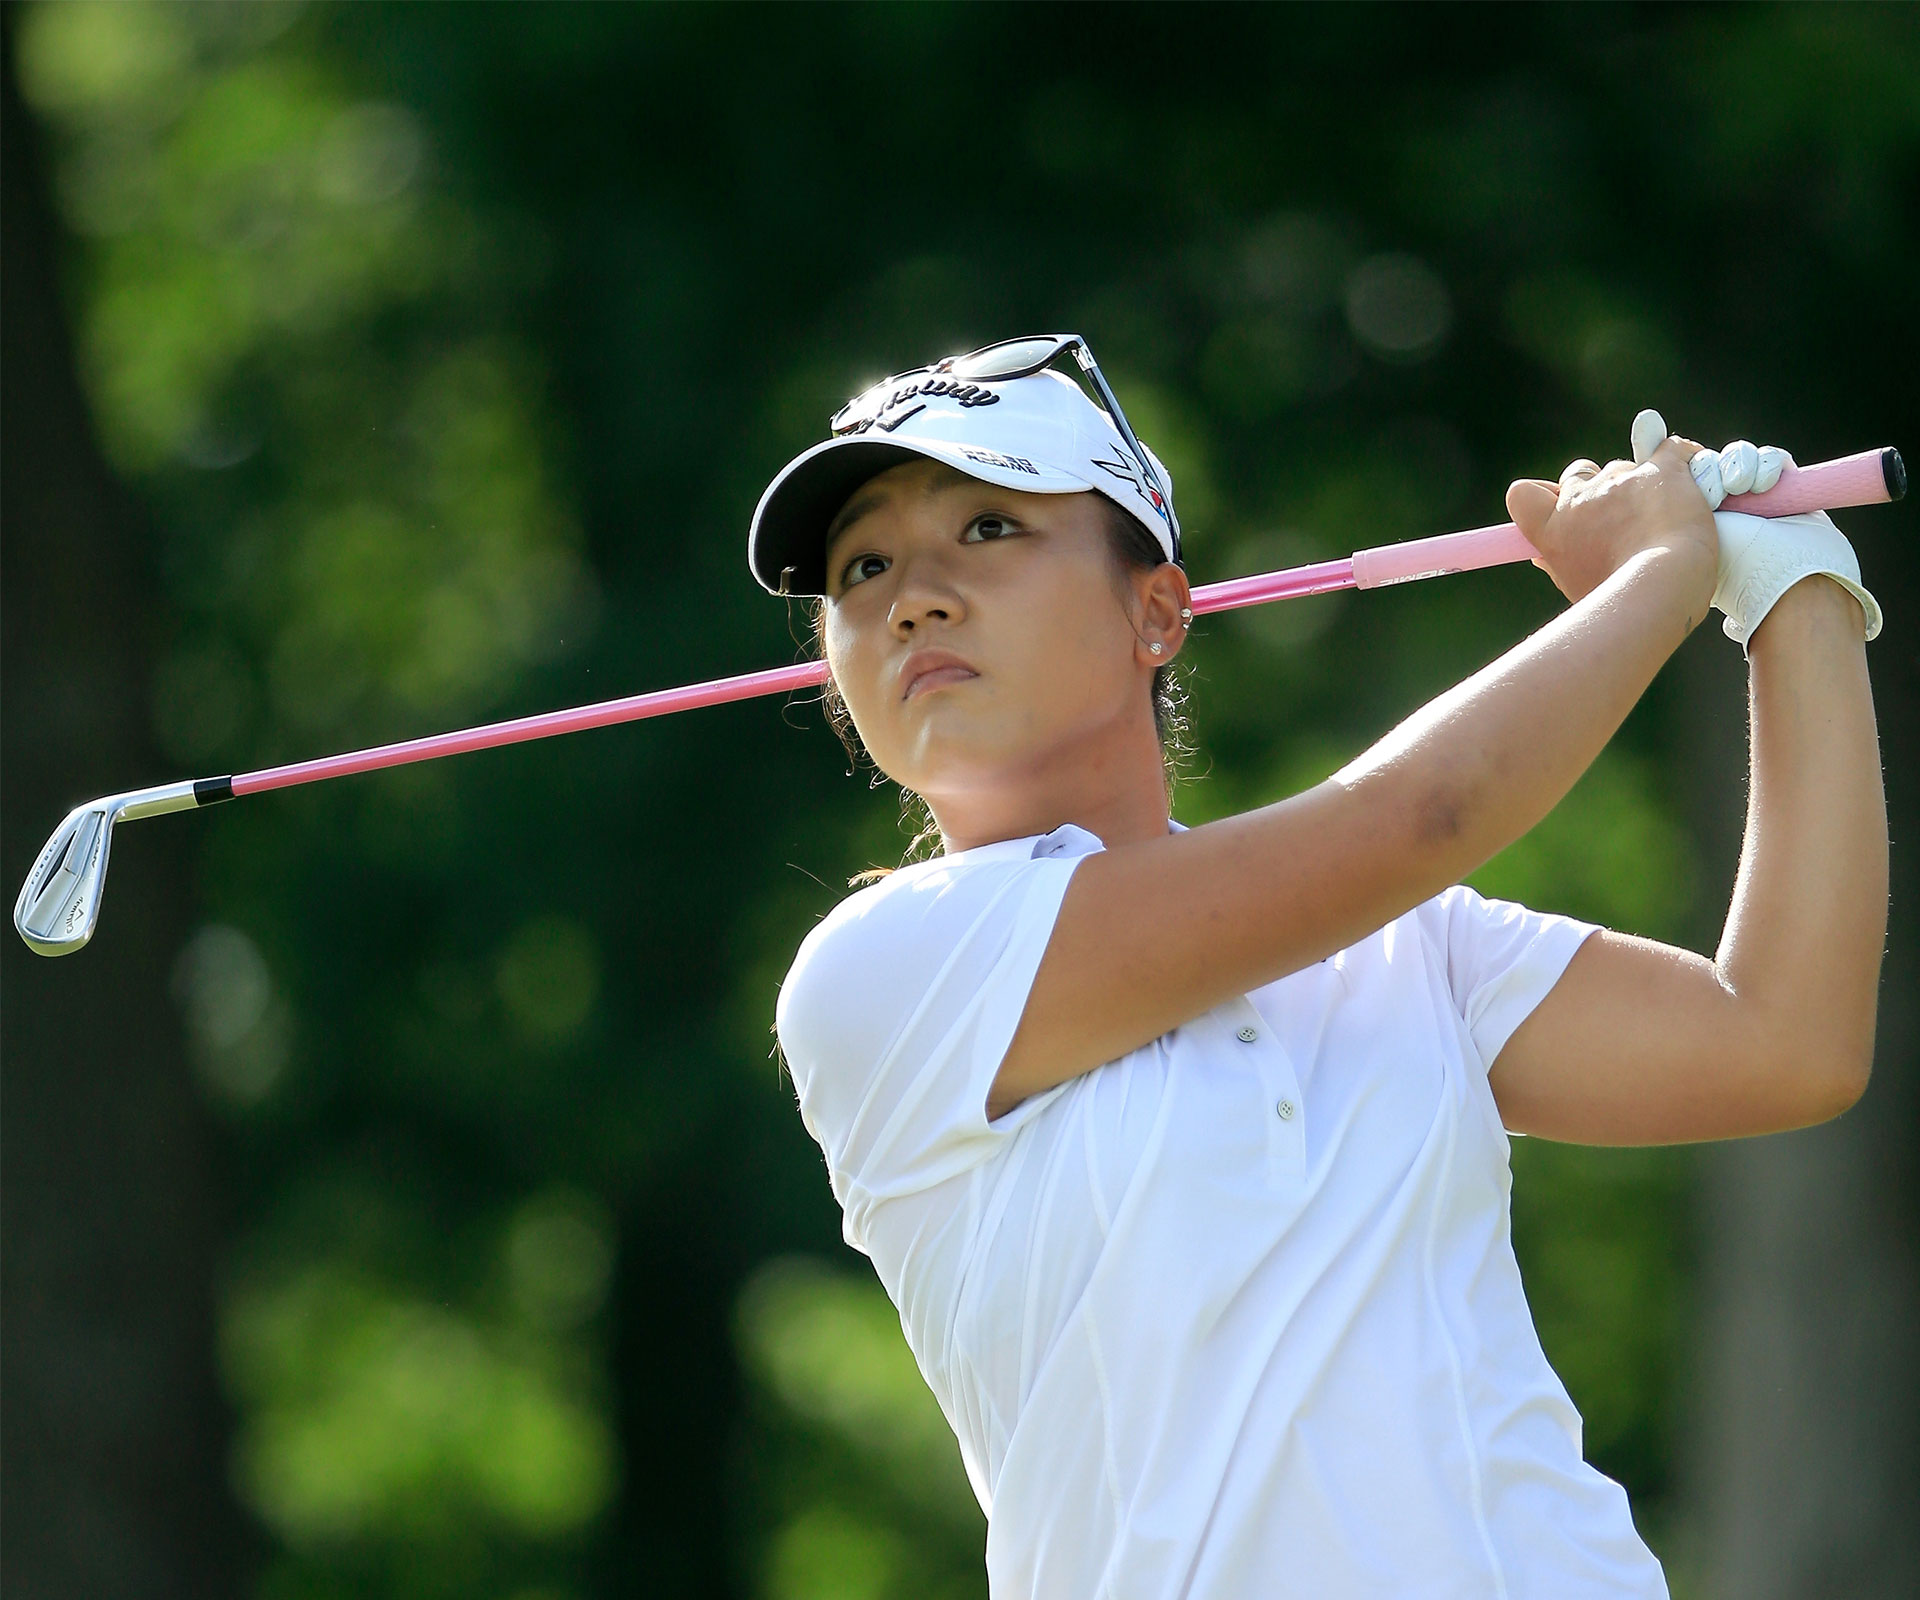 Congratulations to Kiwi golfer Lydia Ko, who beat current world number one Inbee Park, to win Best Female Golfer at the ESPY awards.